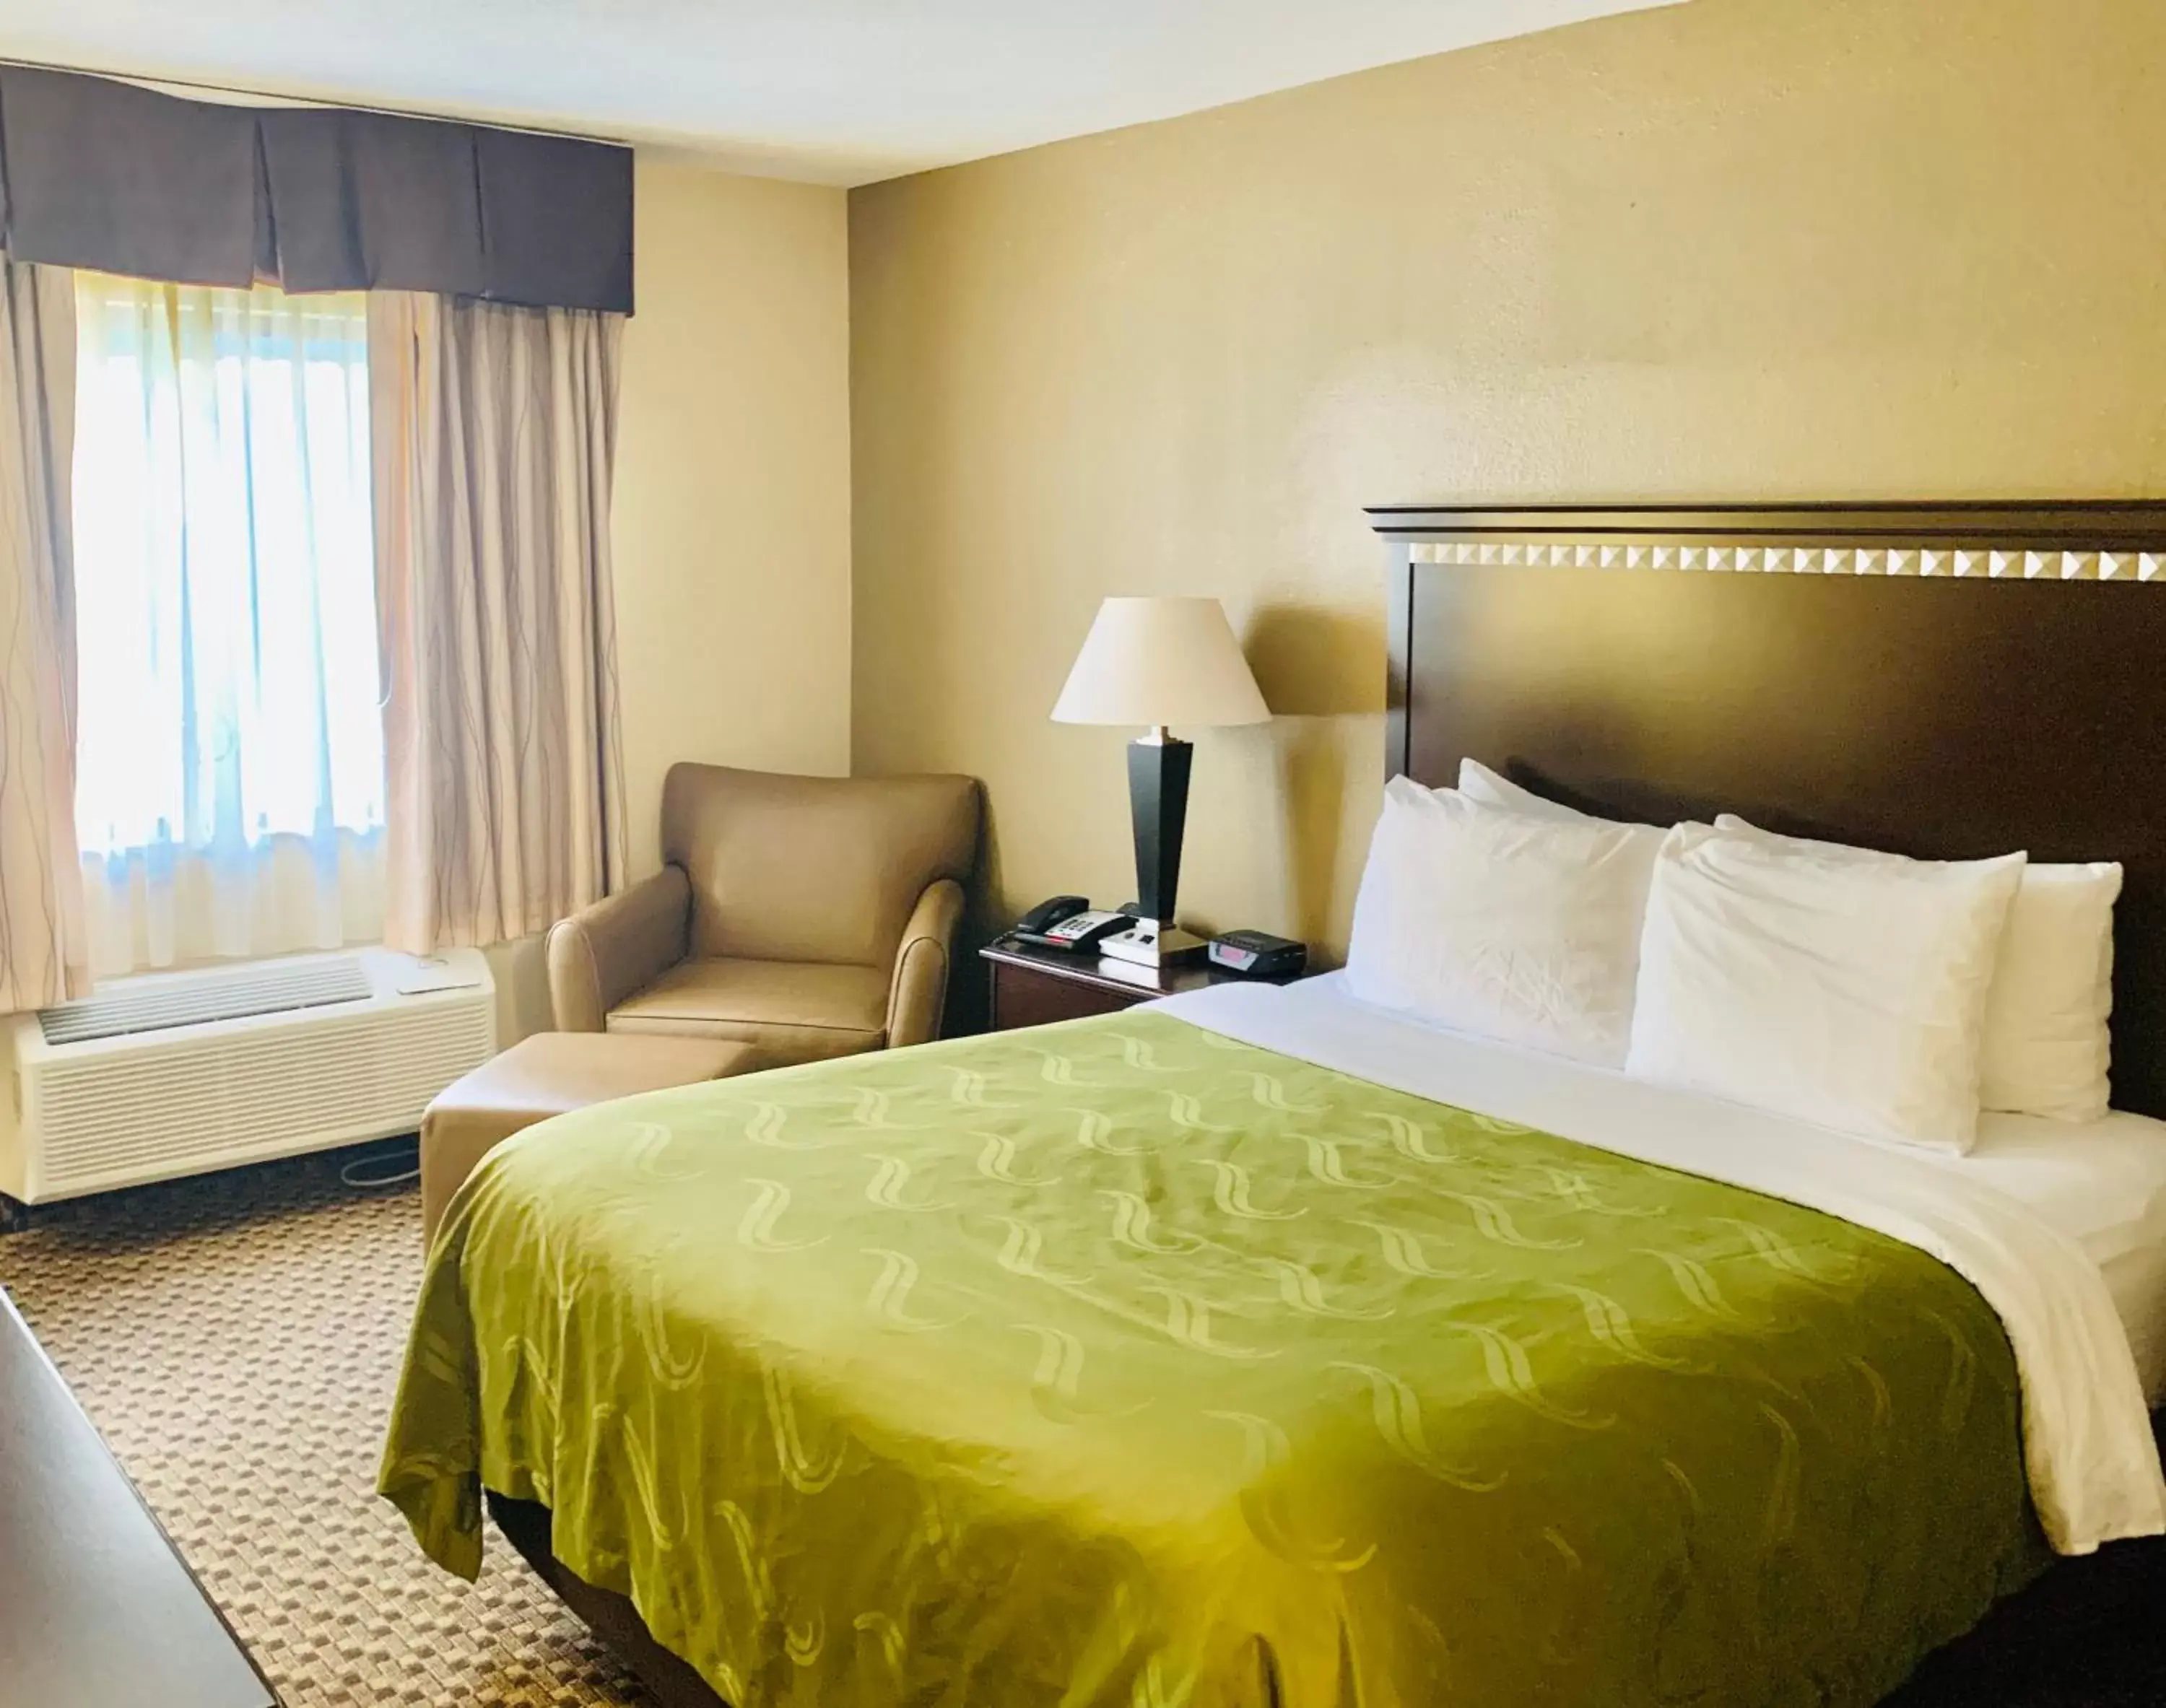 Queen Room with Roll-In Shower - Accessible/Non-Smoking in Quality Inn Macomb near University Area